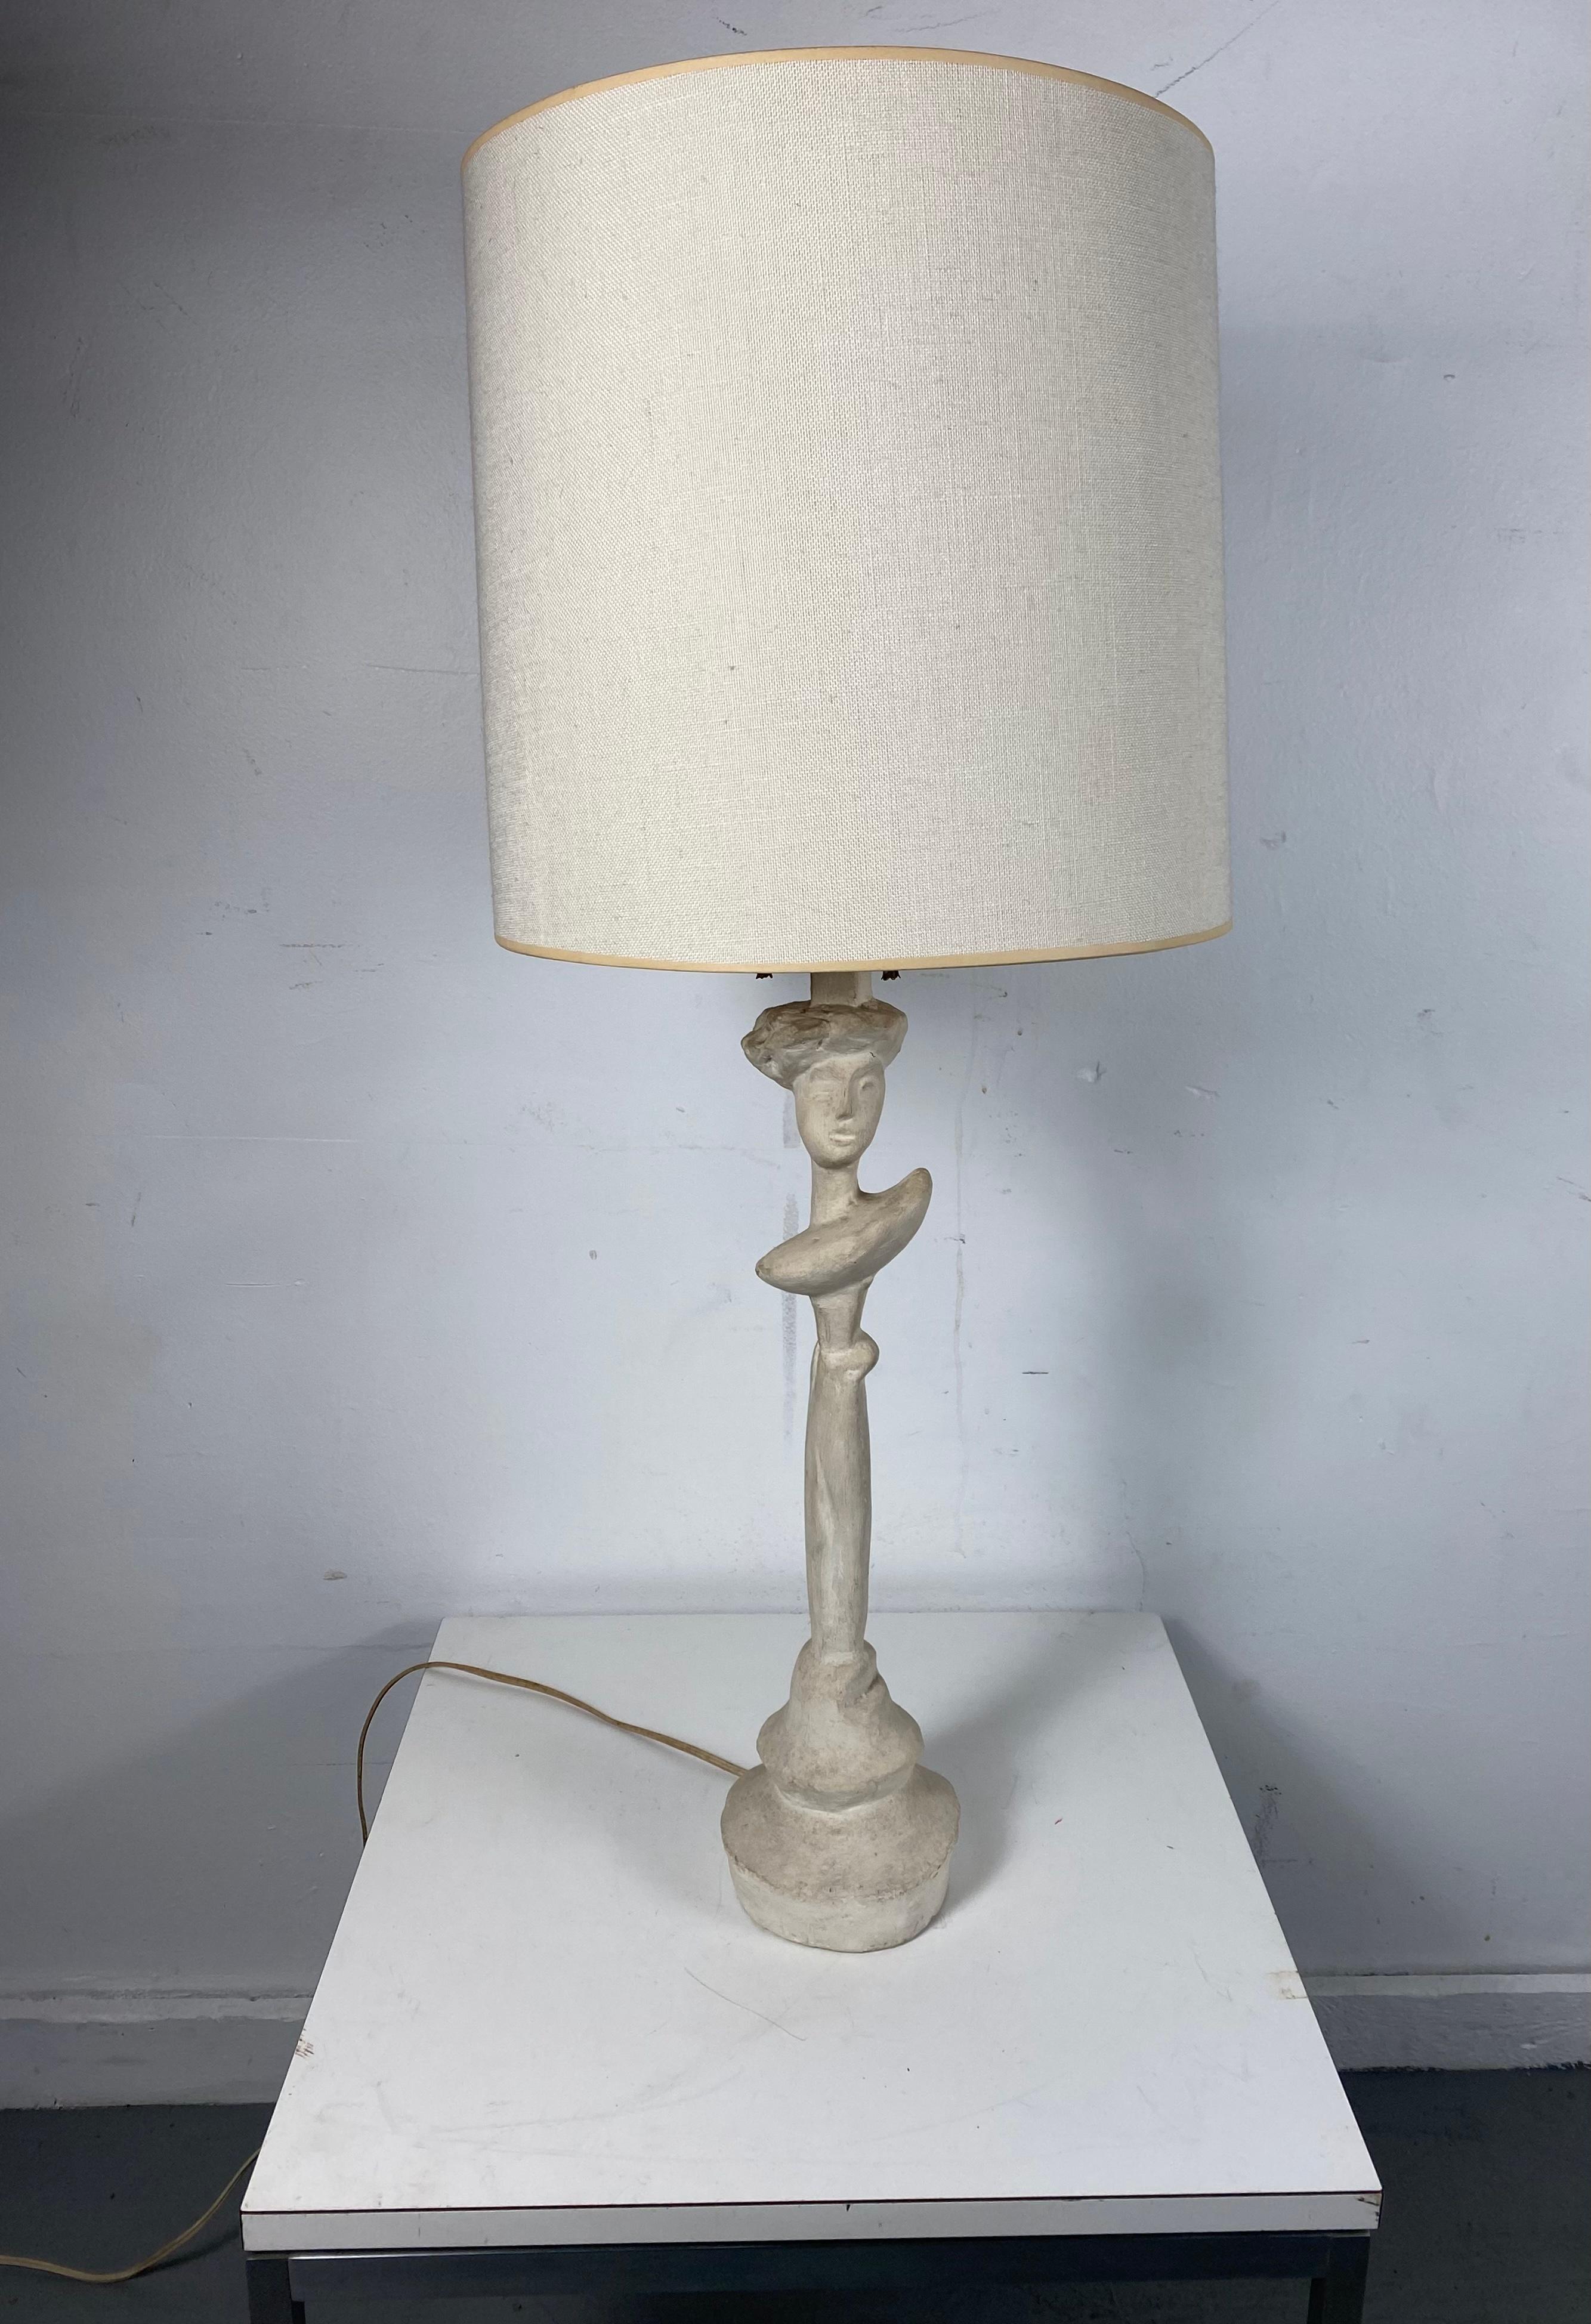 American Classical Sirmos Masque Table Lamp / Giacometti Design, Modernist Regency